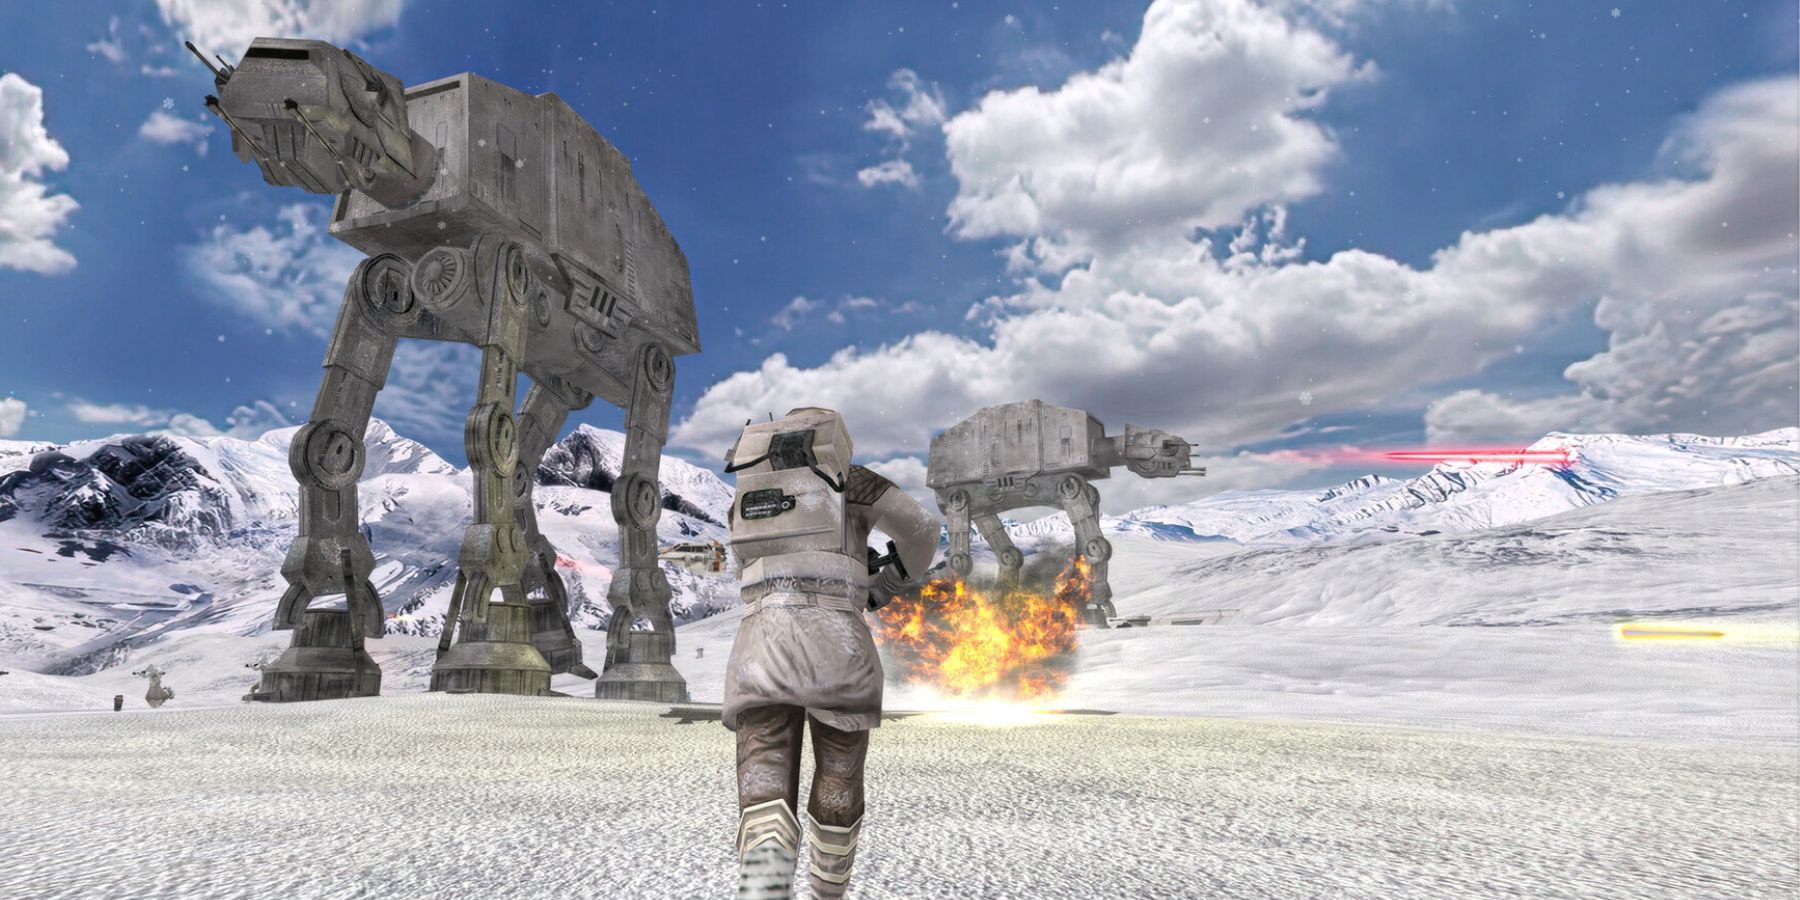  Star Wars: Battlefront Classic Collection Assault in Hoth